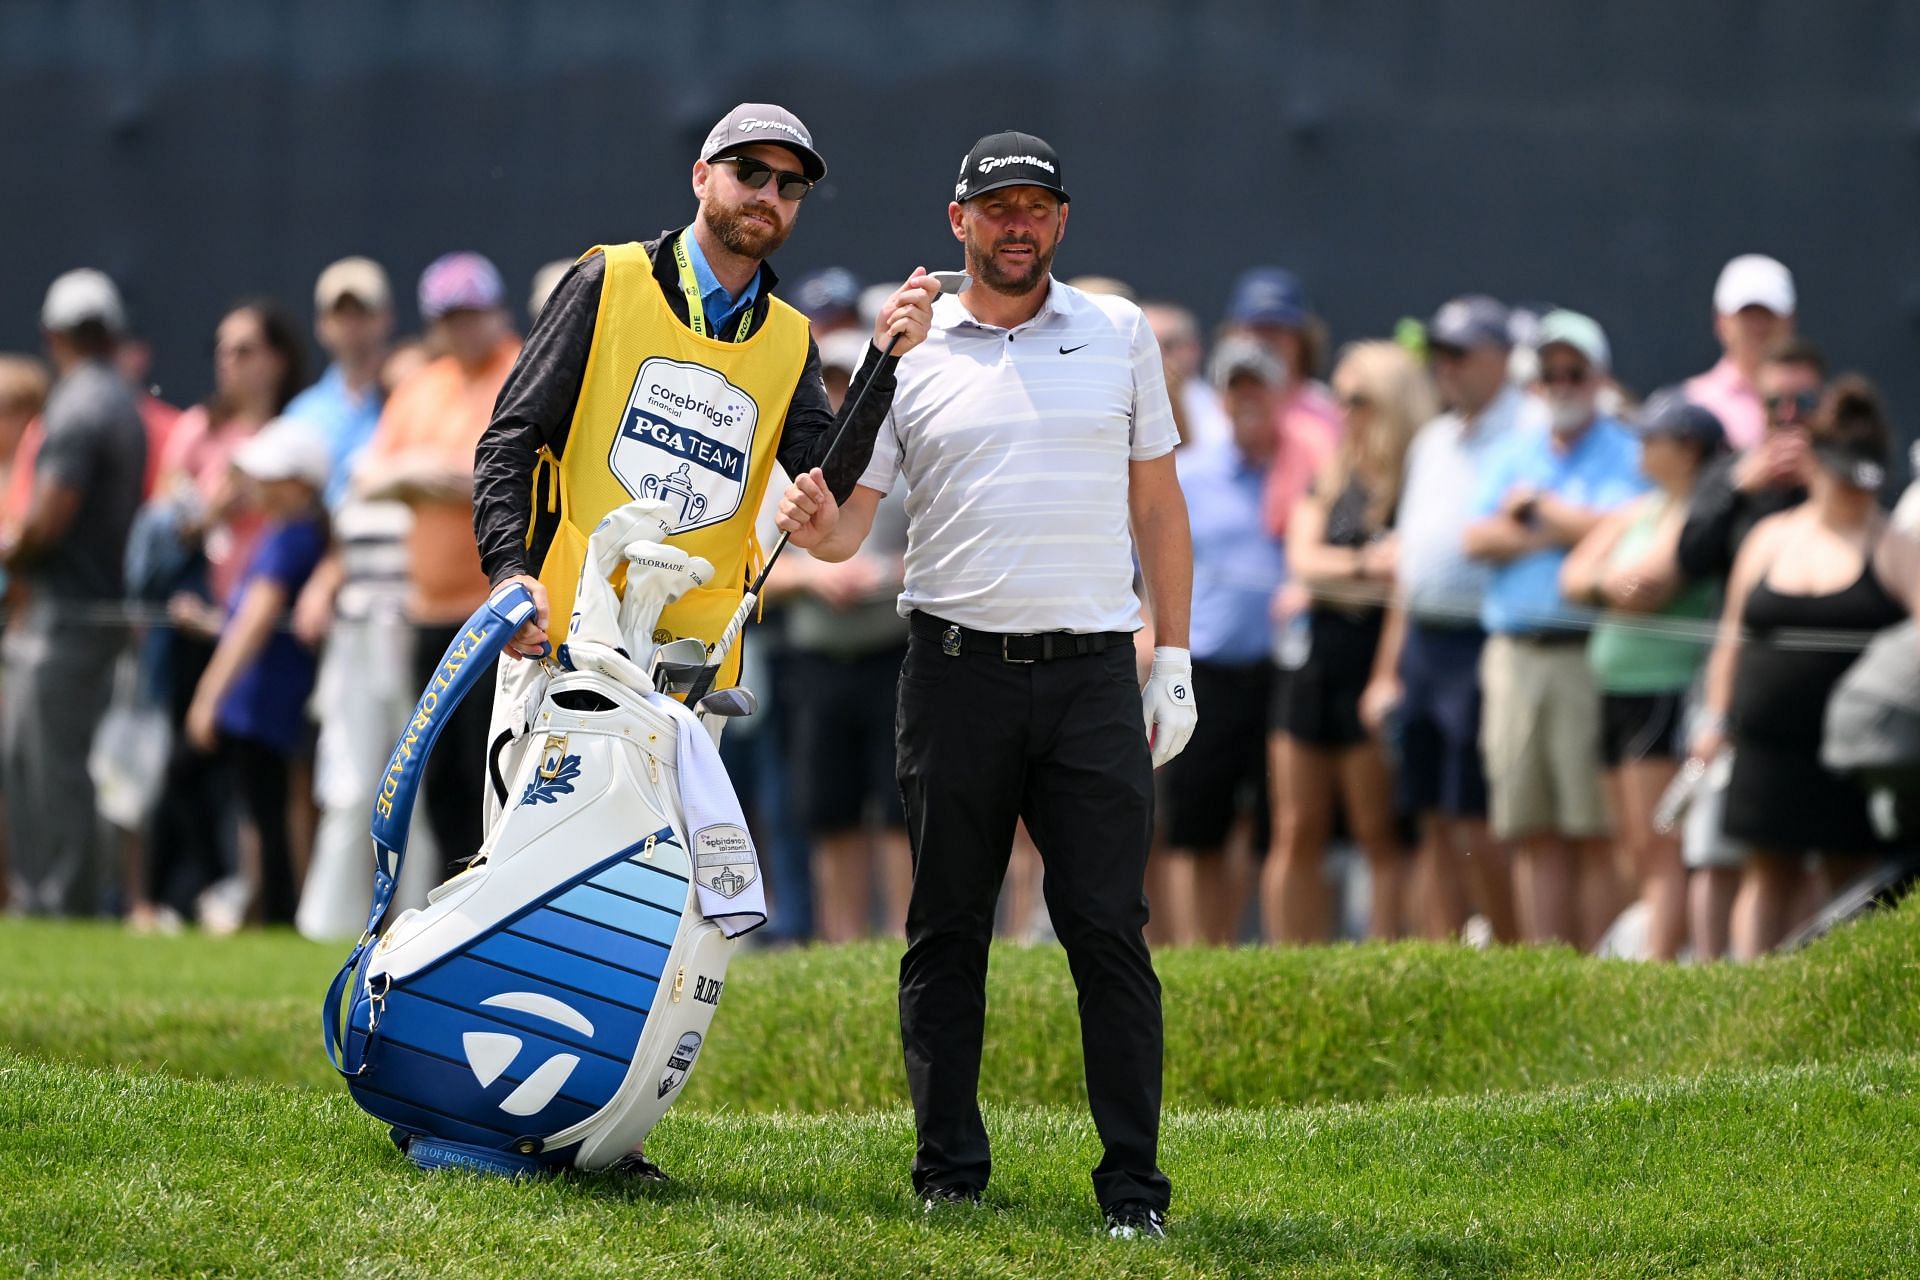 How much did Michael Block’s caddie make in the PGA Championship